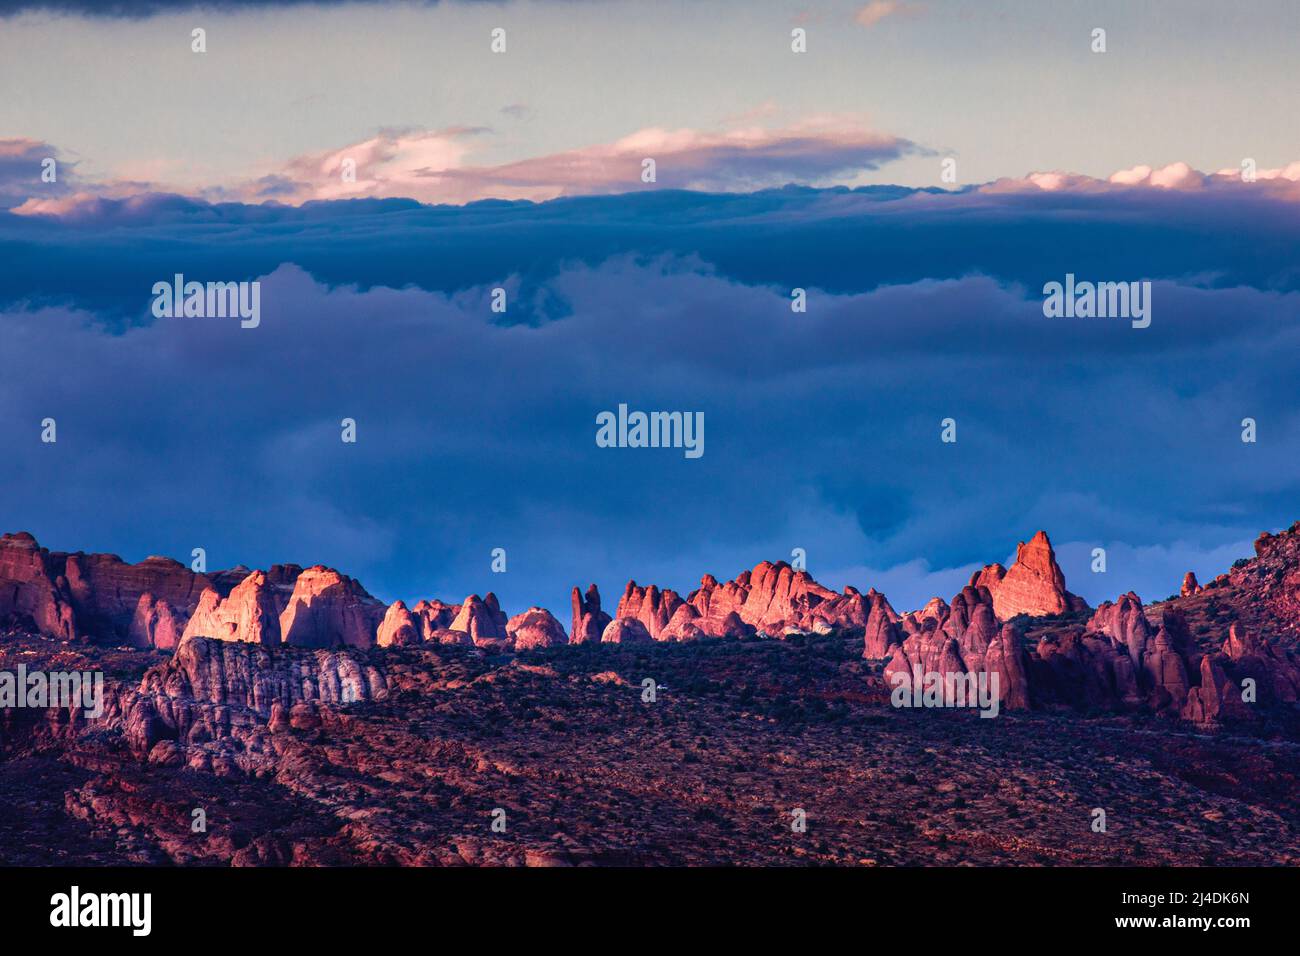 The Fiery Furnace area in Arches National Park, Utah lights up before sunset. Stock Photo